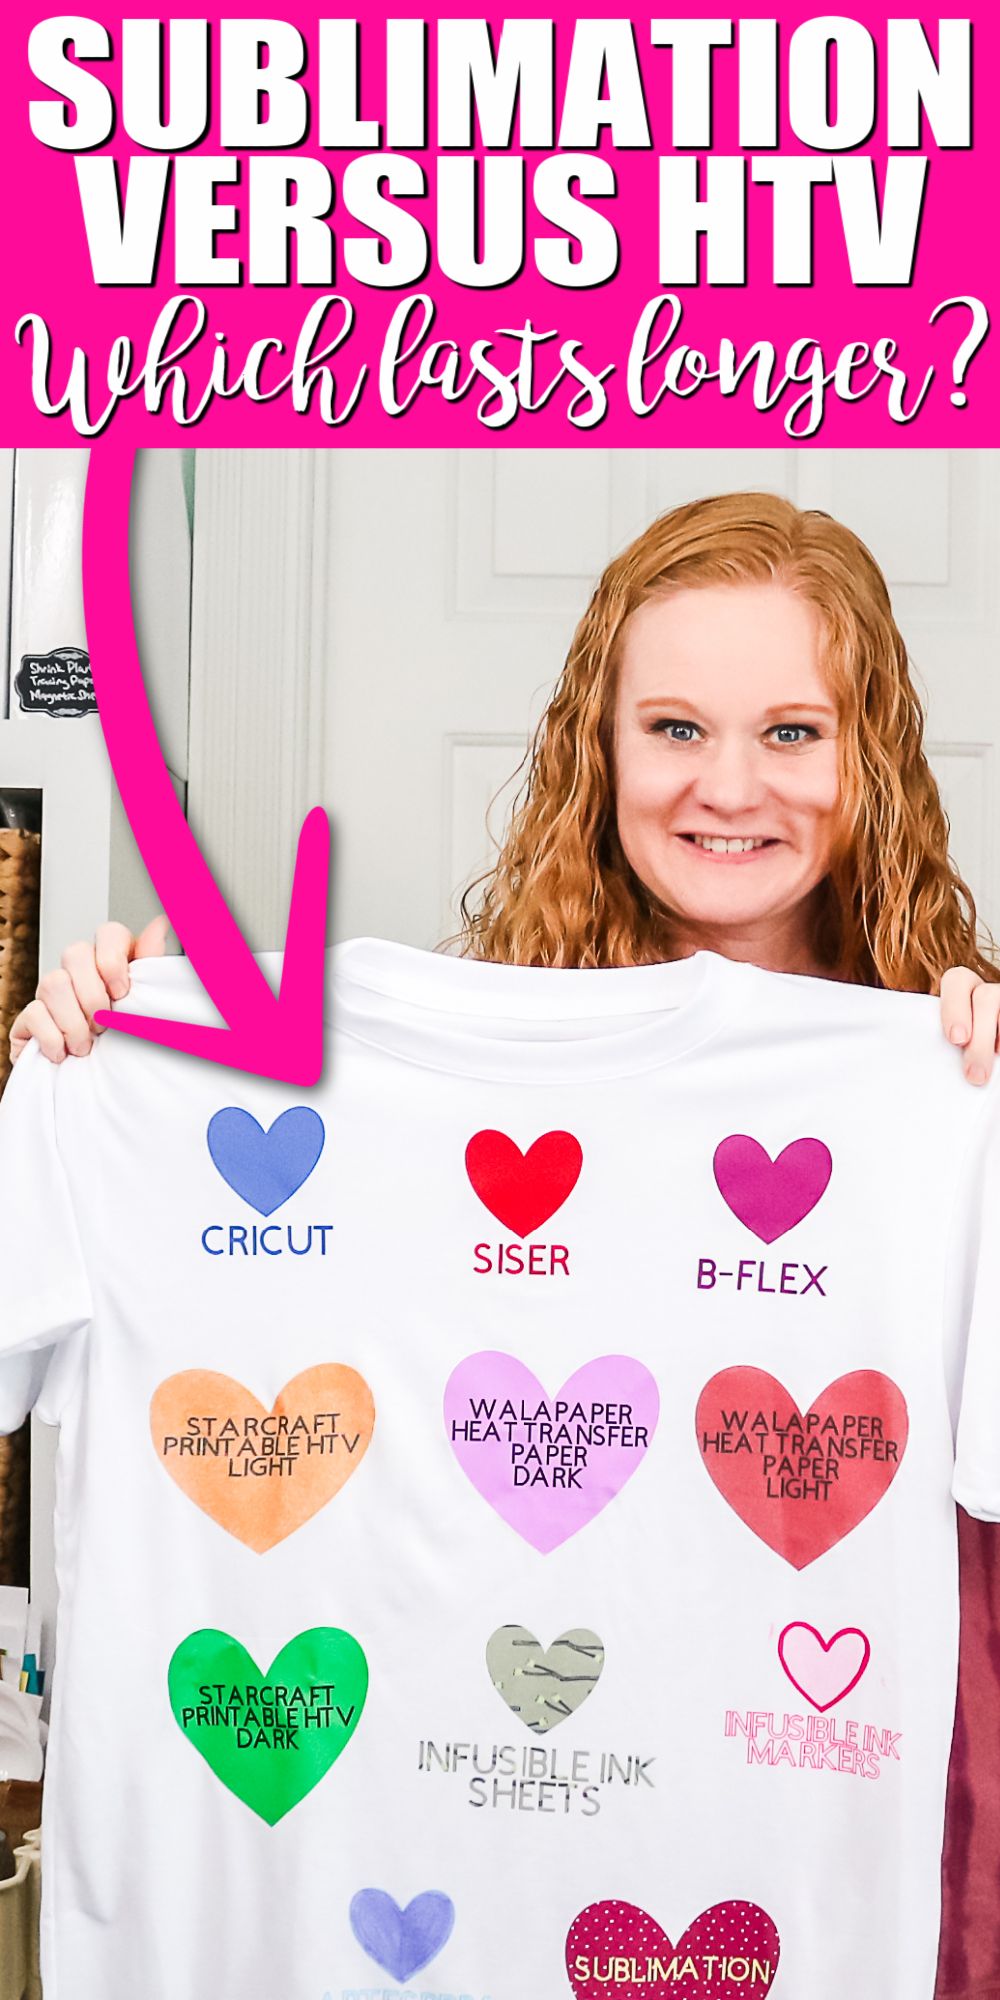 How to make shirts with Cricut 101 - HTV, Sublimation, and Infusible Ink -  Analytical Mommy LLC